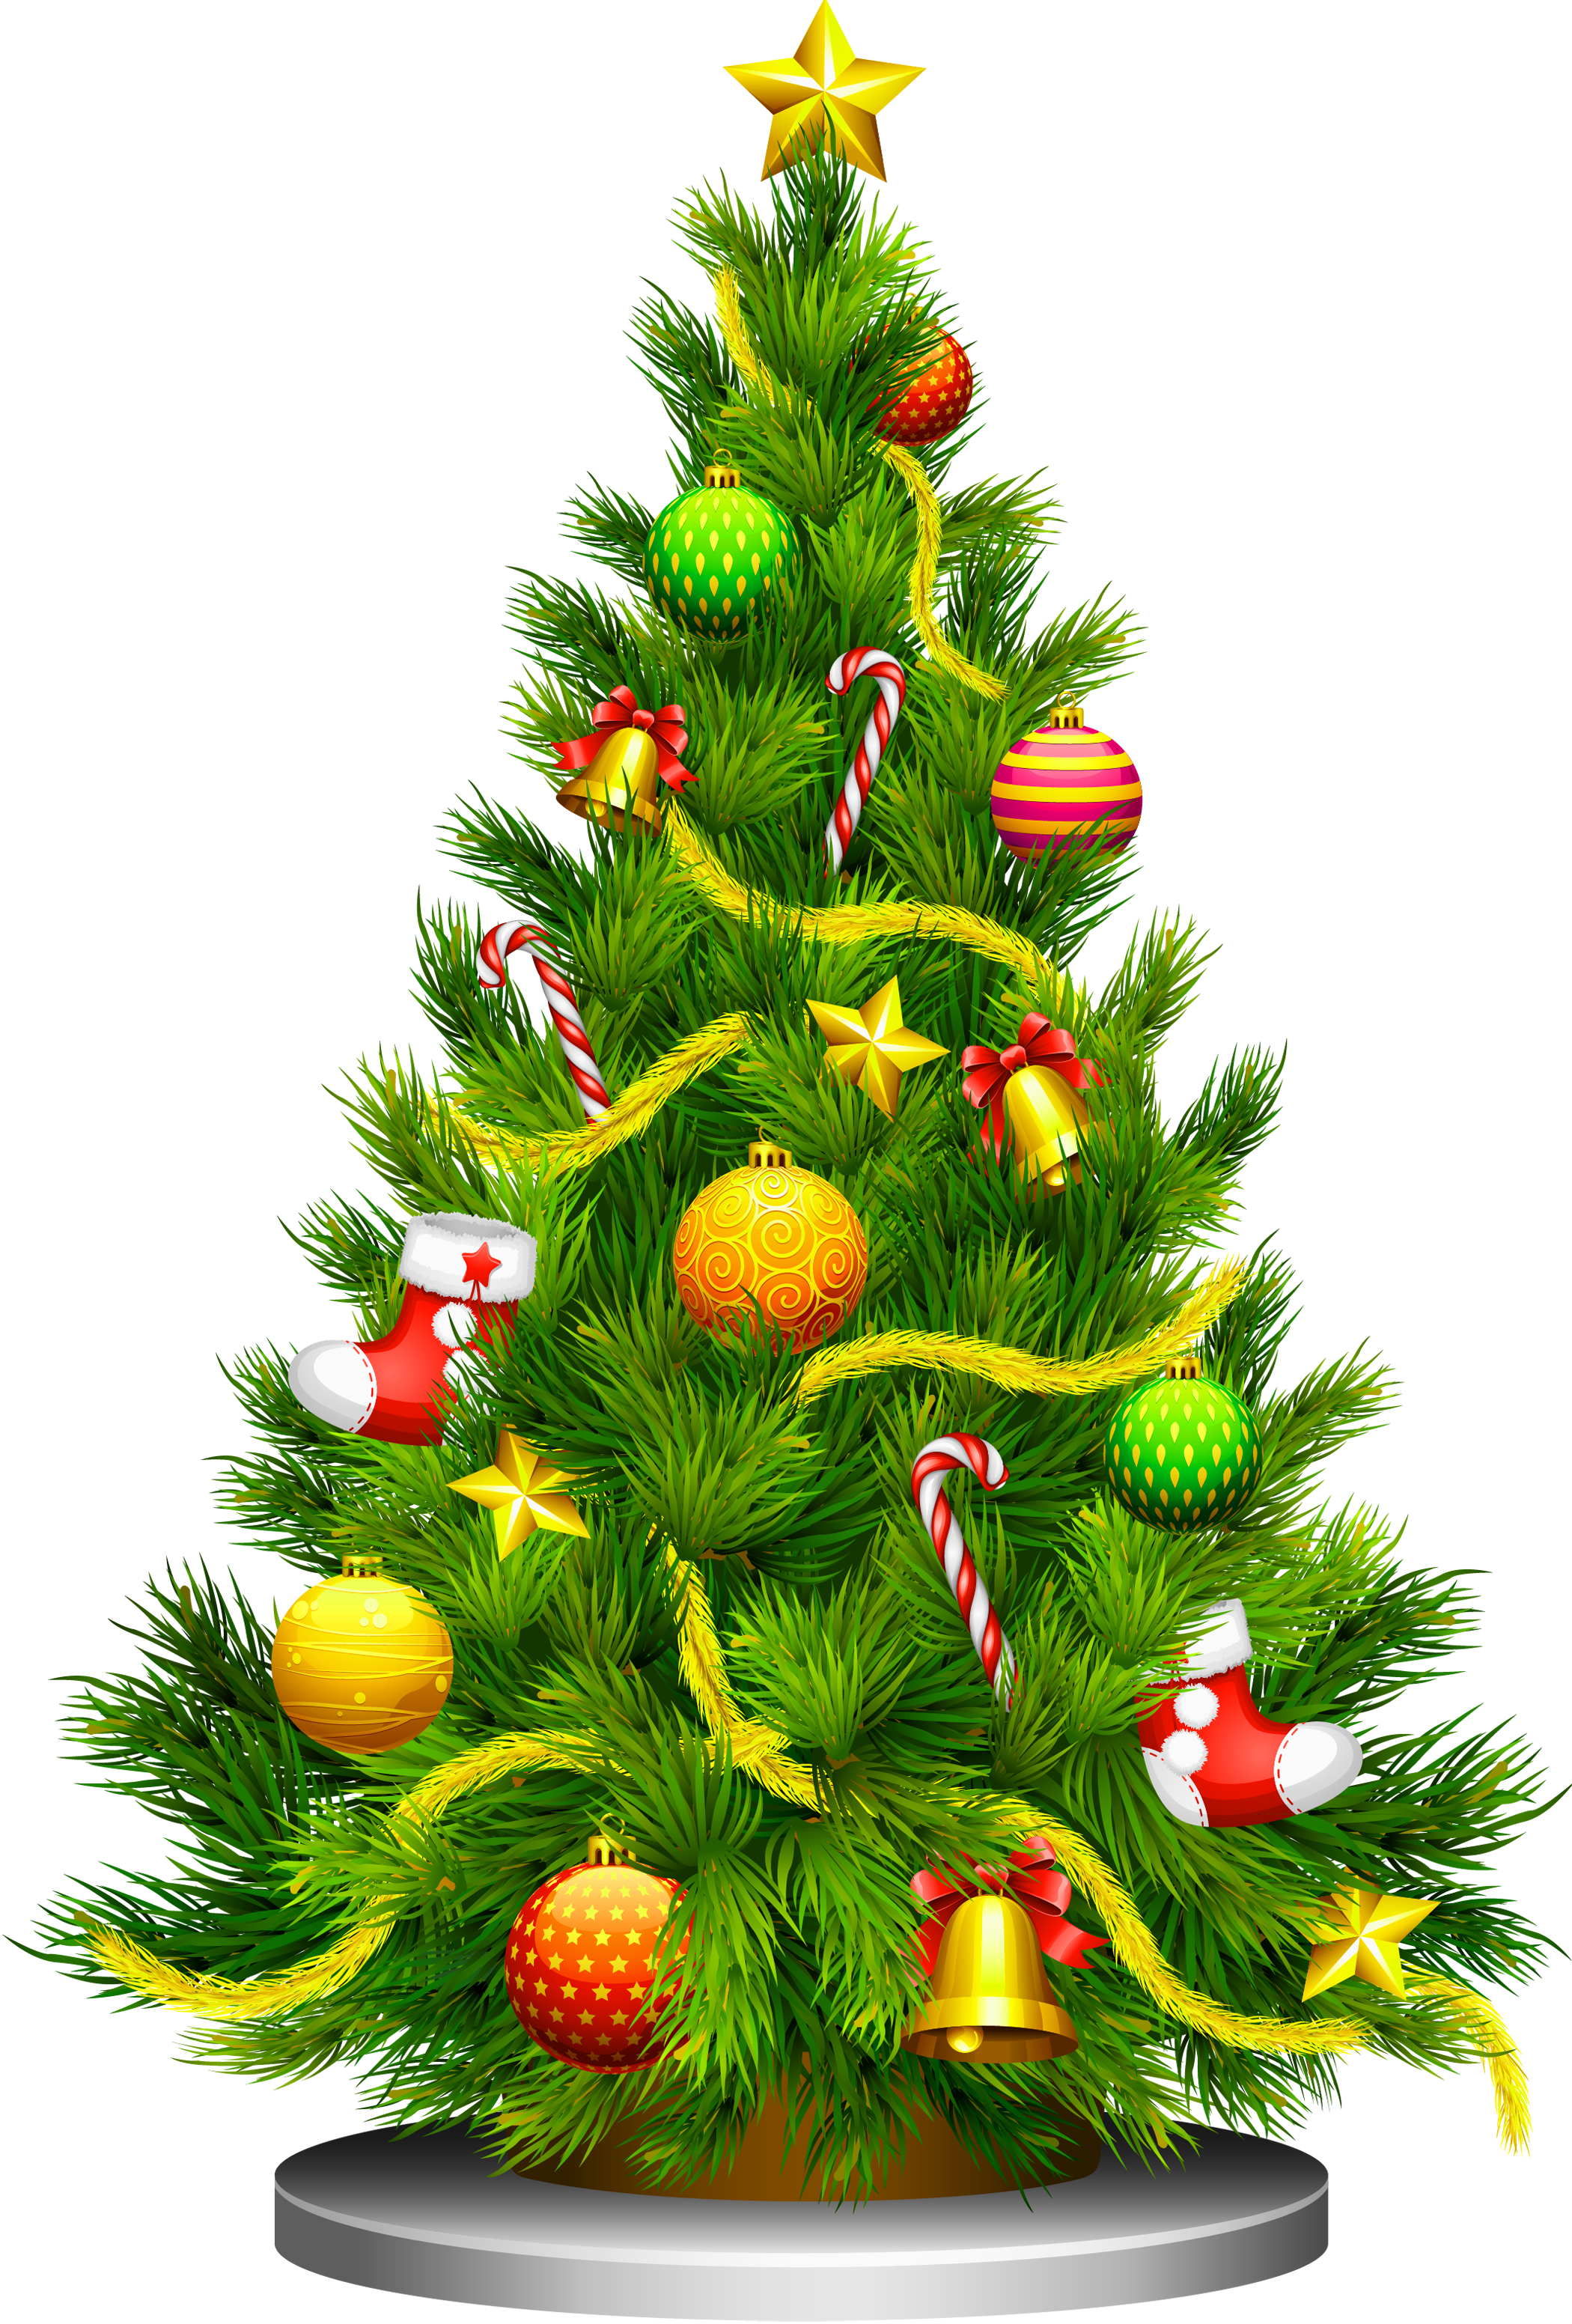 Transparent_Christmas_Tree_Clipart.png?m=1380751200 